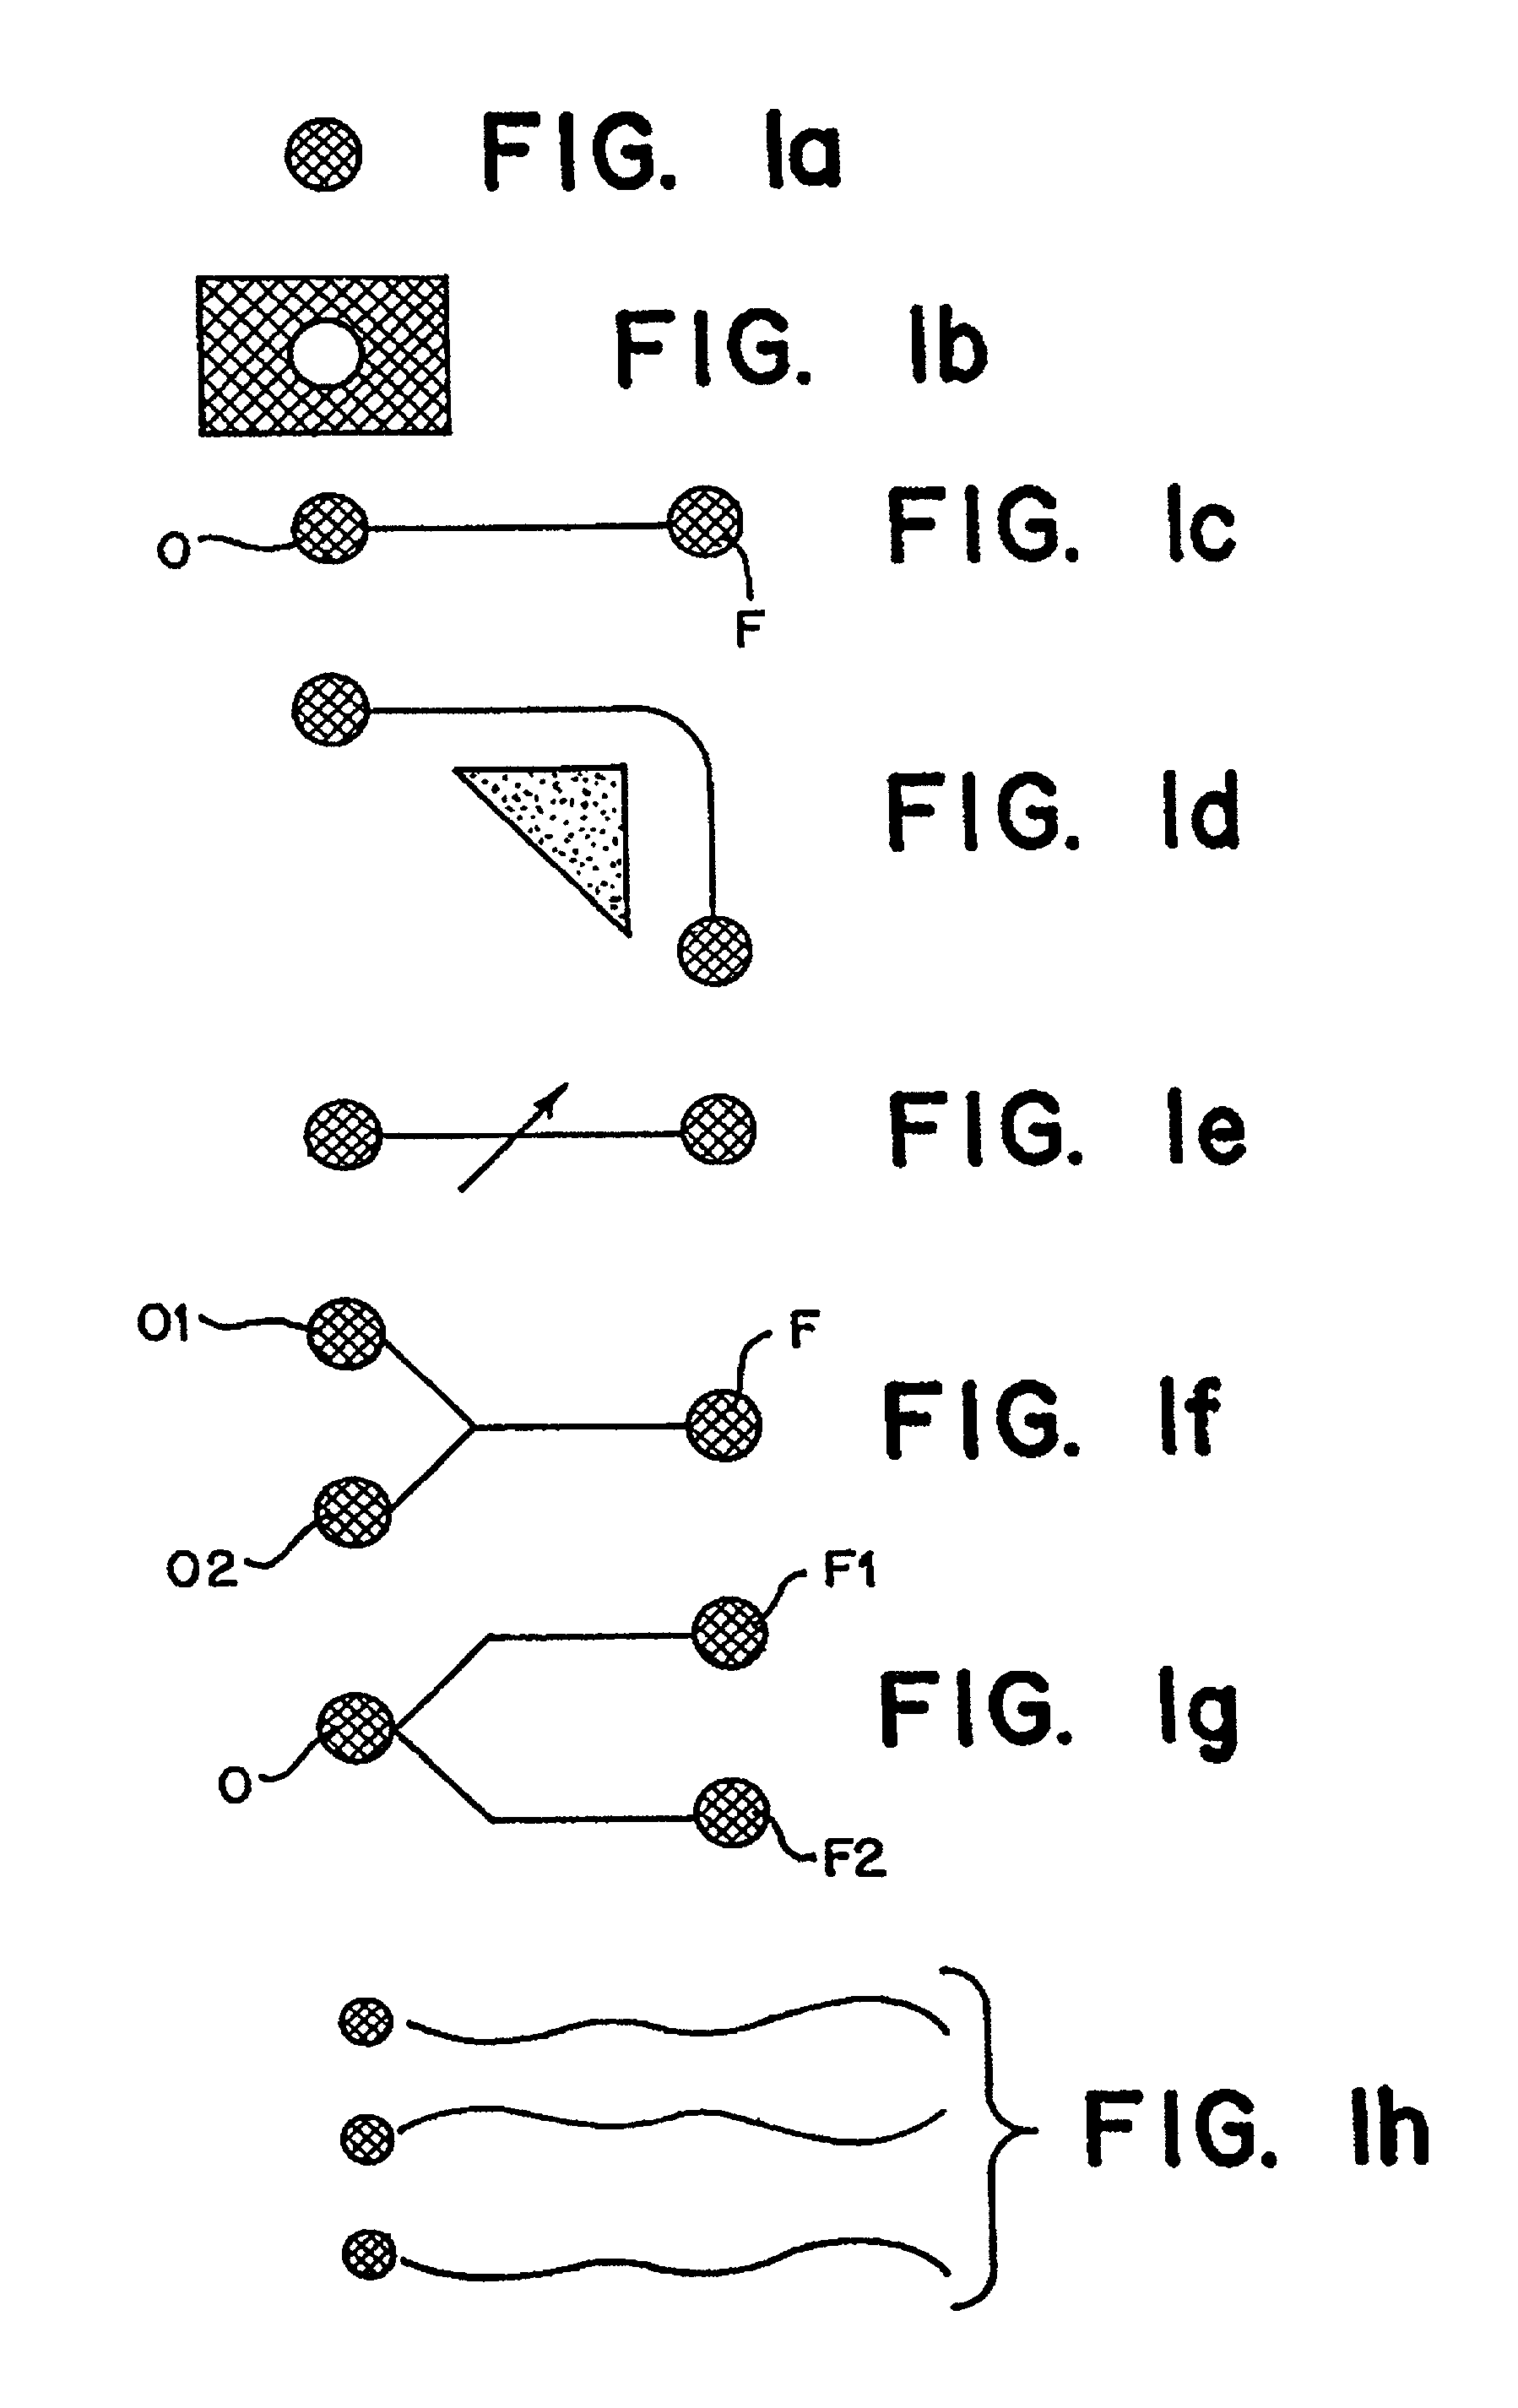 System and method for programmable illumination pattern generation